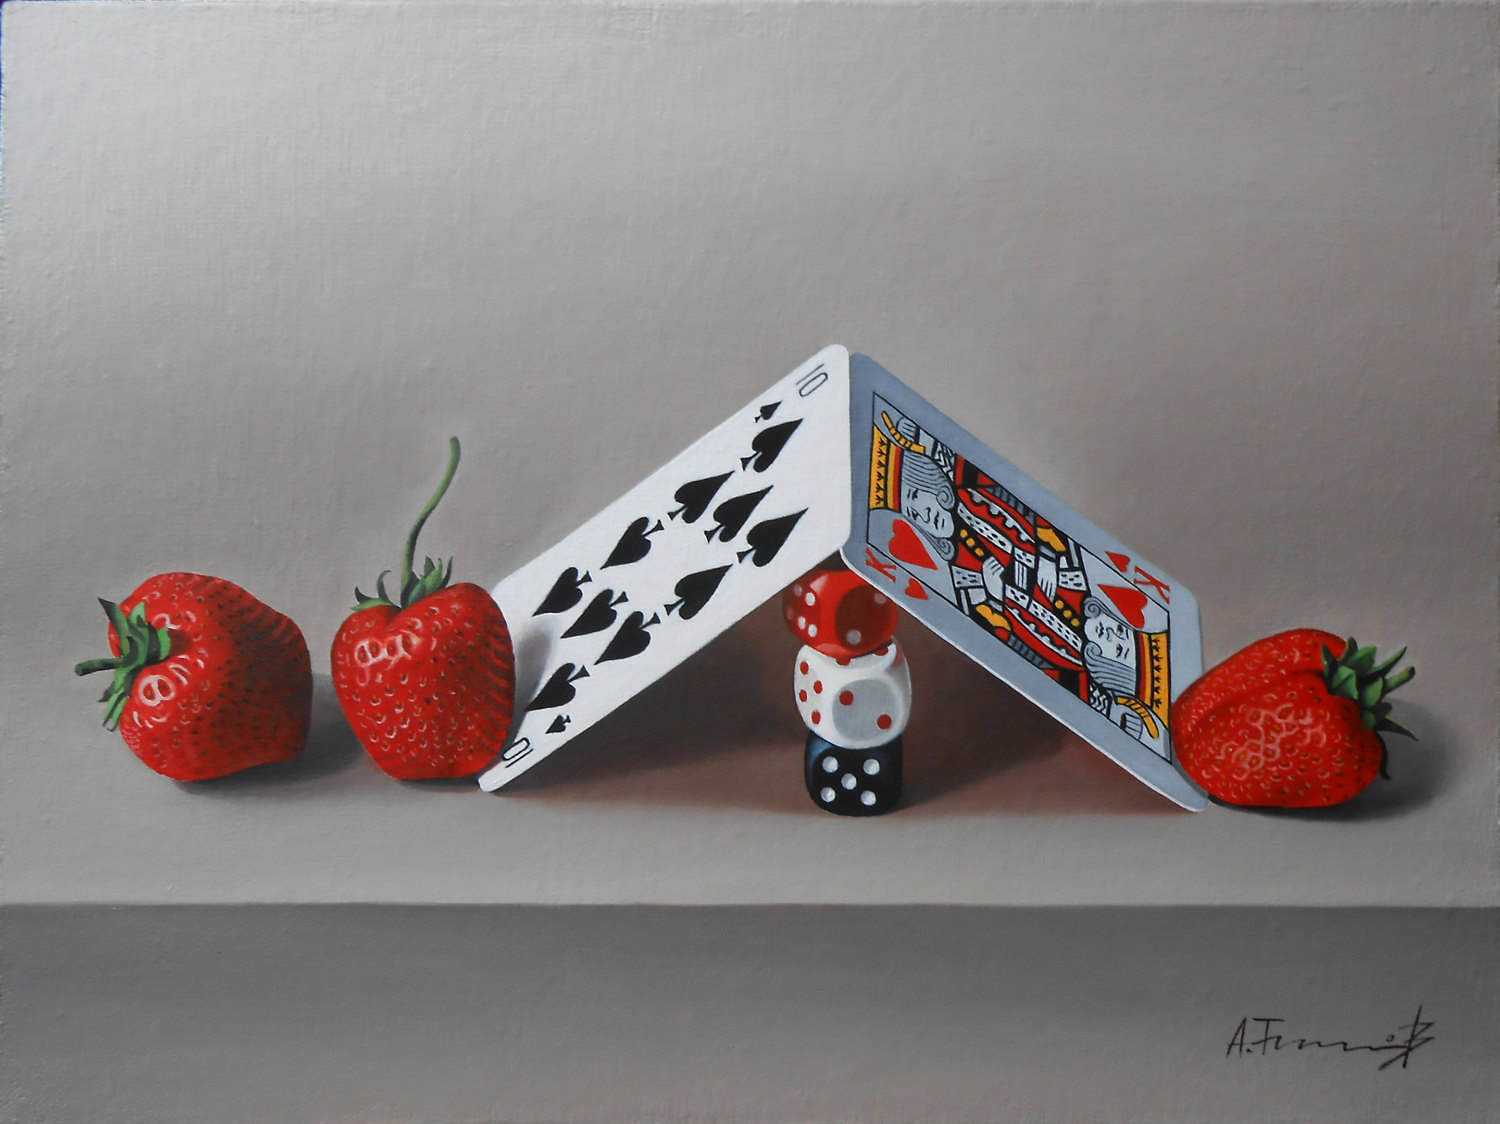 Cards, Dice and Strawberries